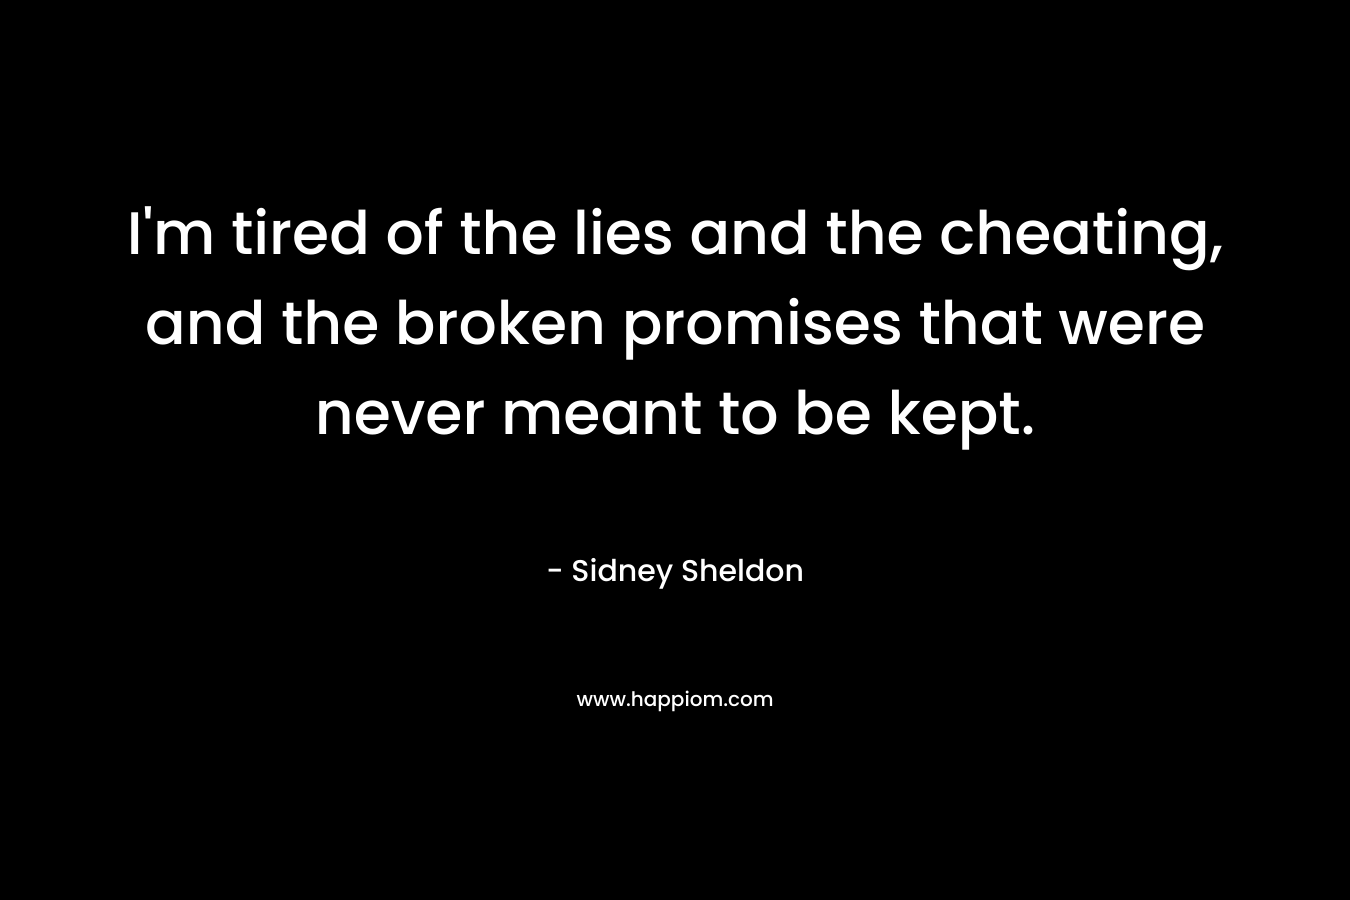 I'm tired of the lies and the cheating, and the broken promises that were never meant to be kept.